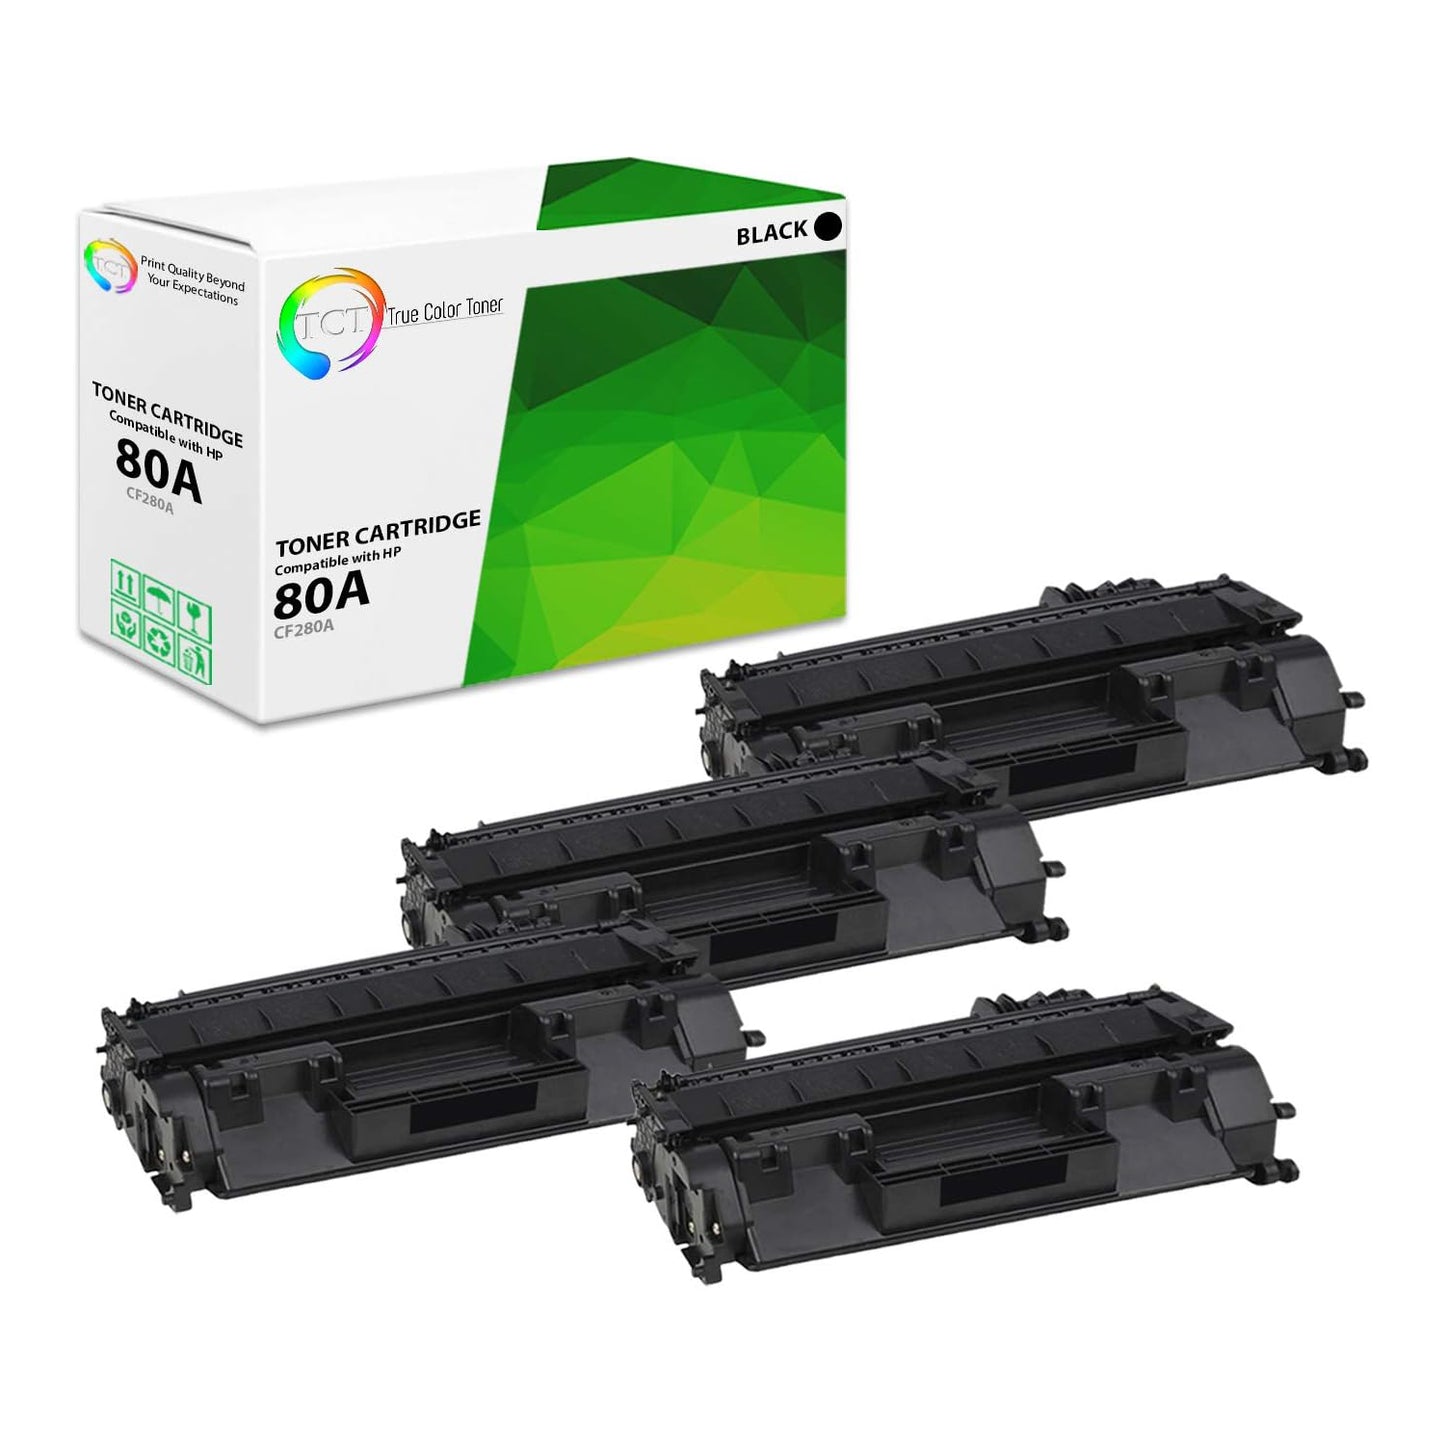 TCT Compatible Toner Cartridge Replacement for the HP 80A Series - 4 Pack Black